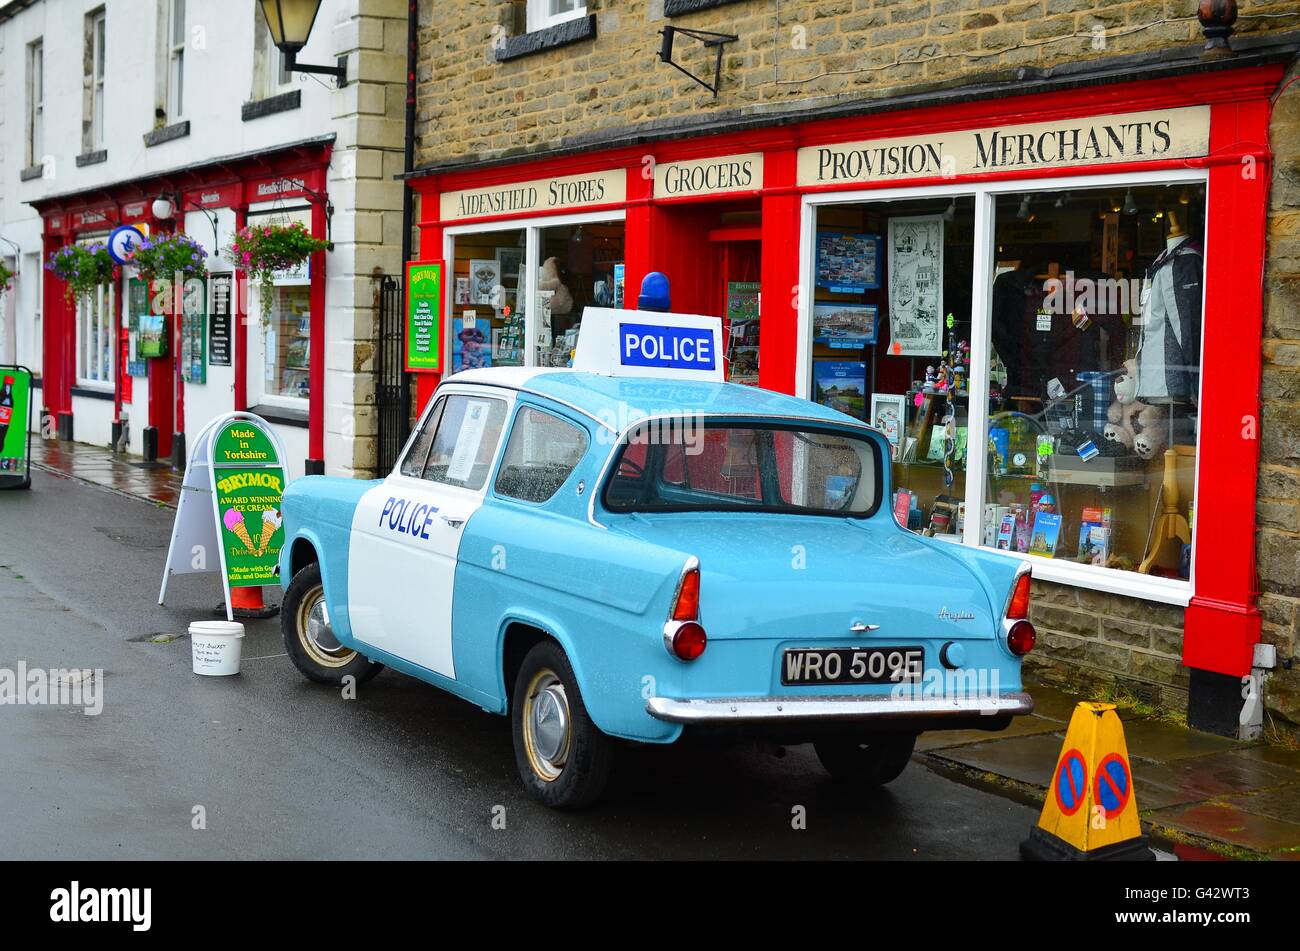 Goathland village shop in the North Yorkshire Moors with a Ford Anglia Police car. Setting ofictional village of Aidensfield Stock Photo